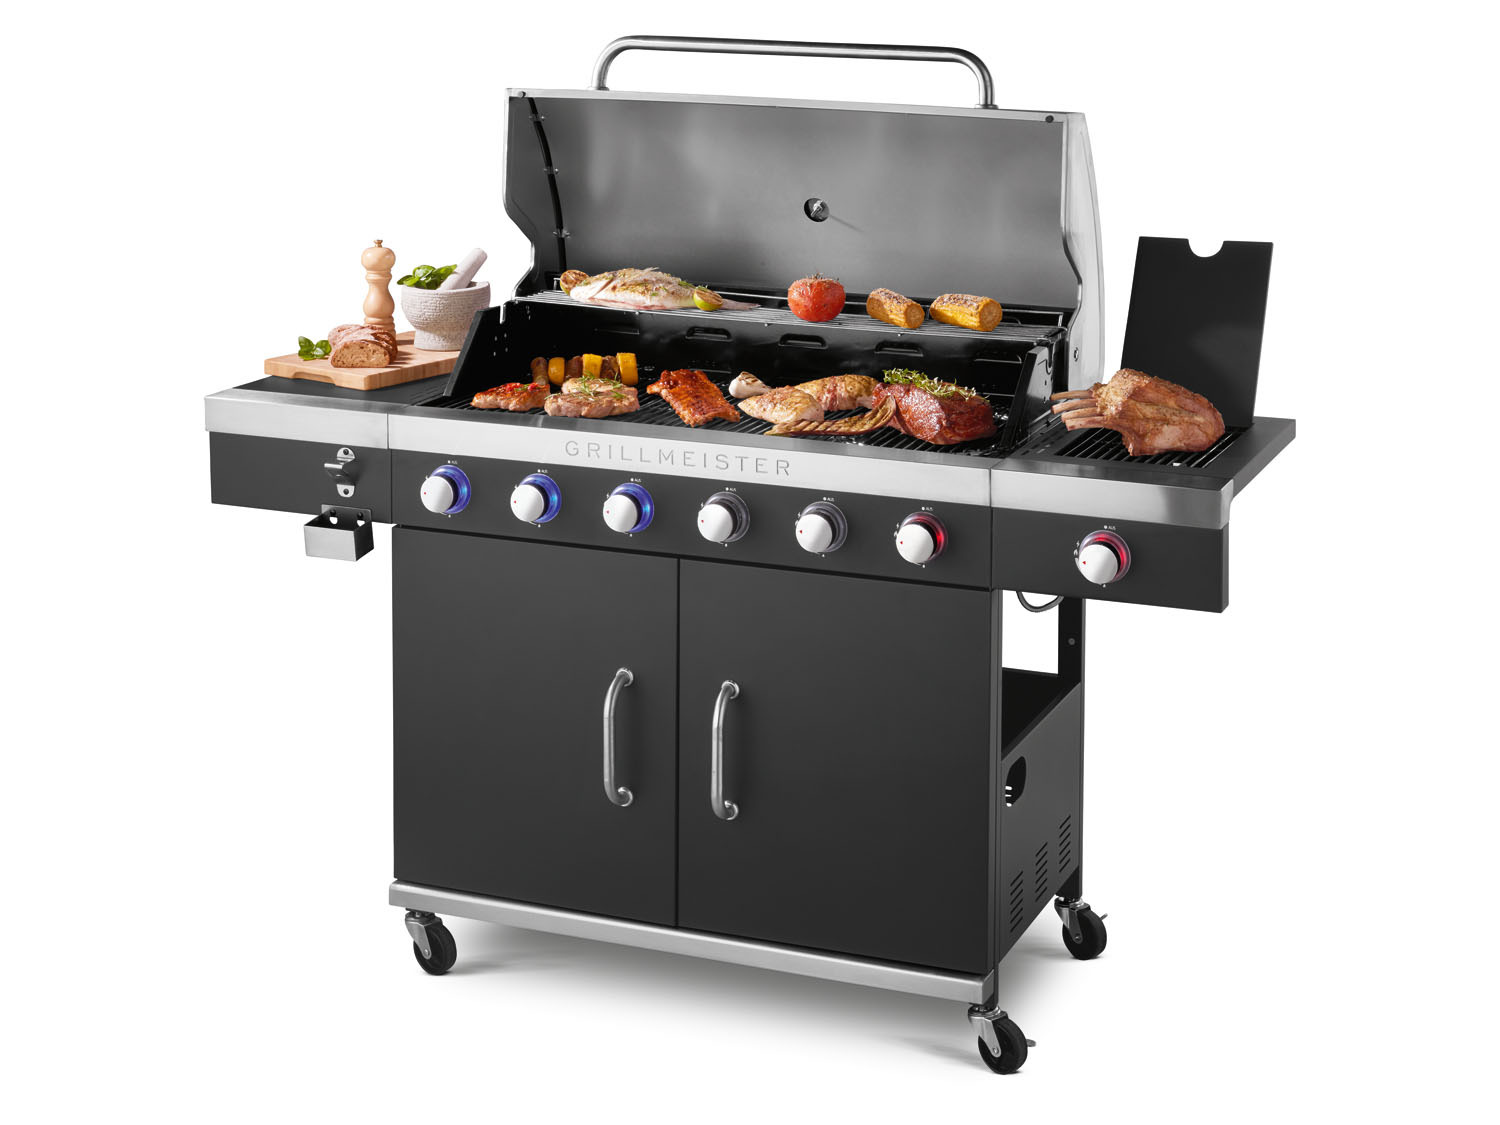 GRILLMEISTER Gasgrill, 6plus1 LIDL 26,1 | kW Brenner